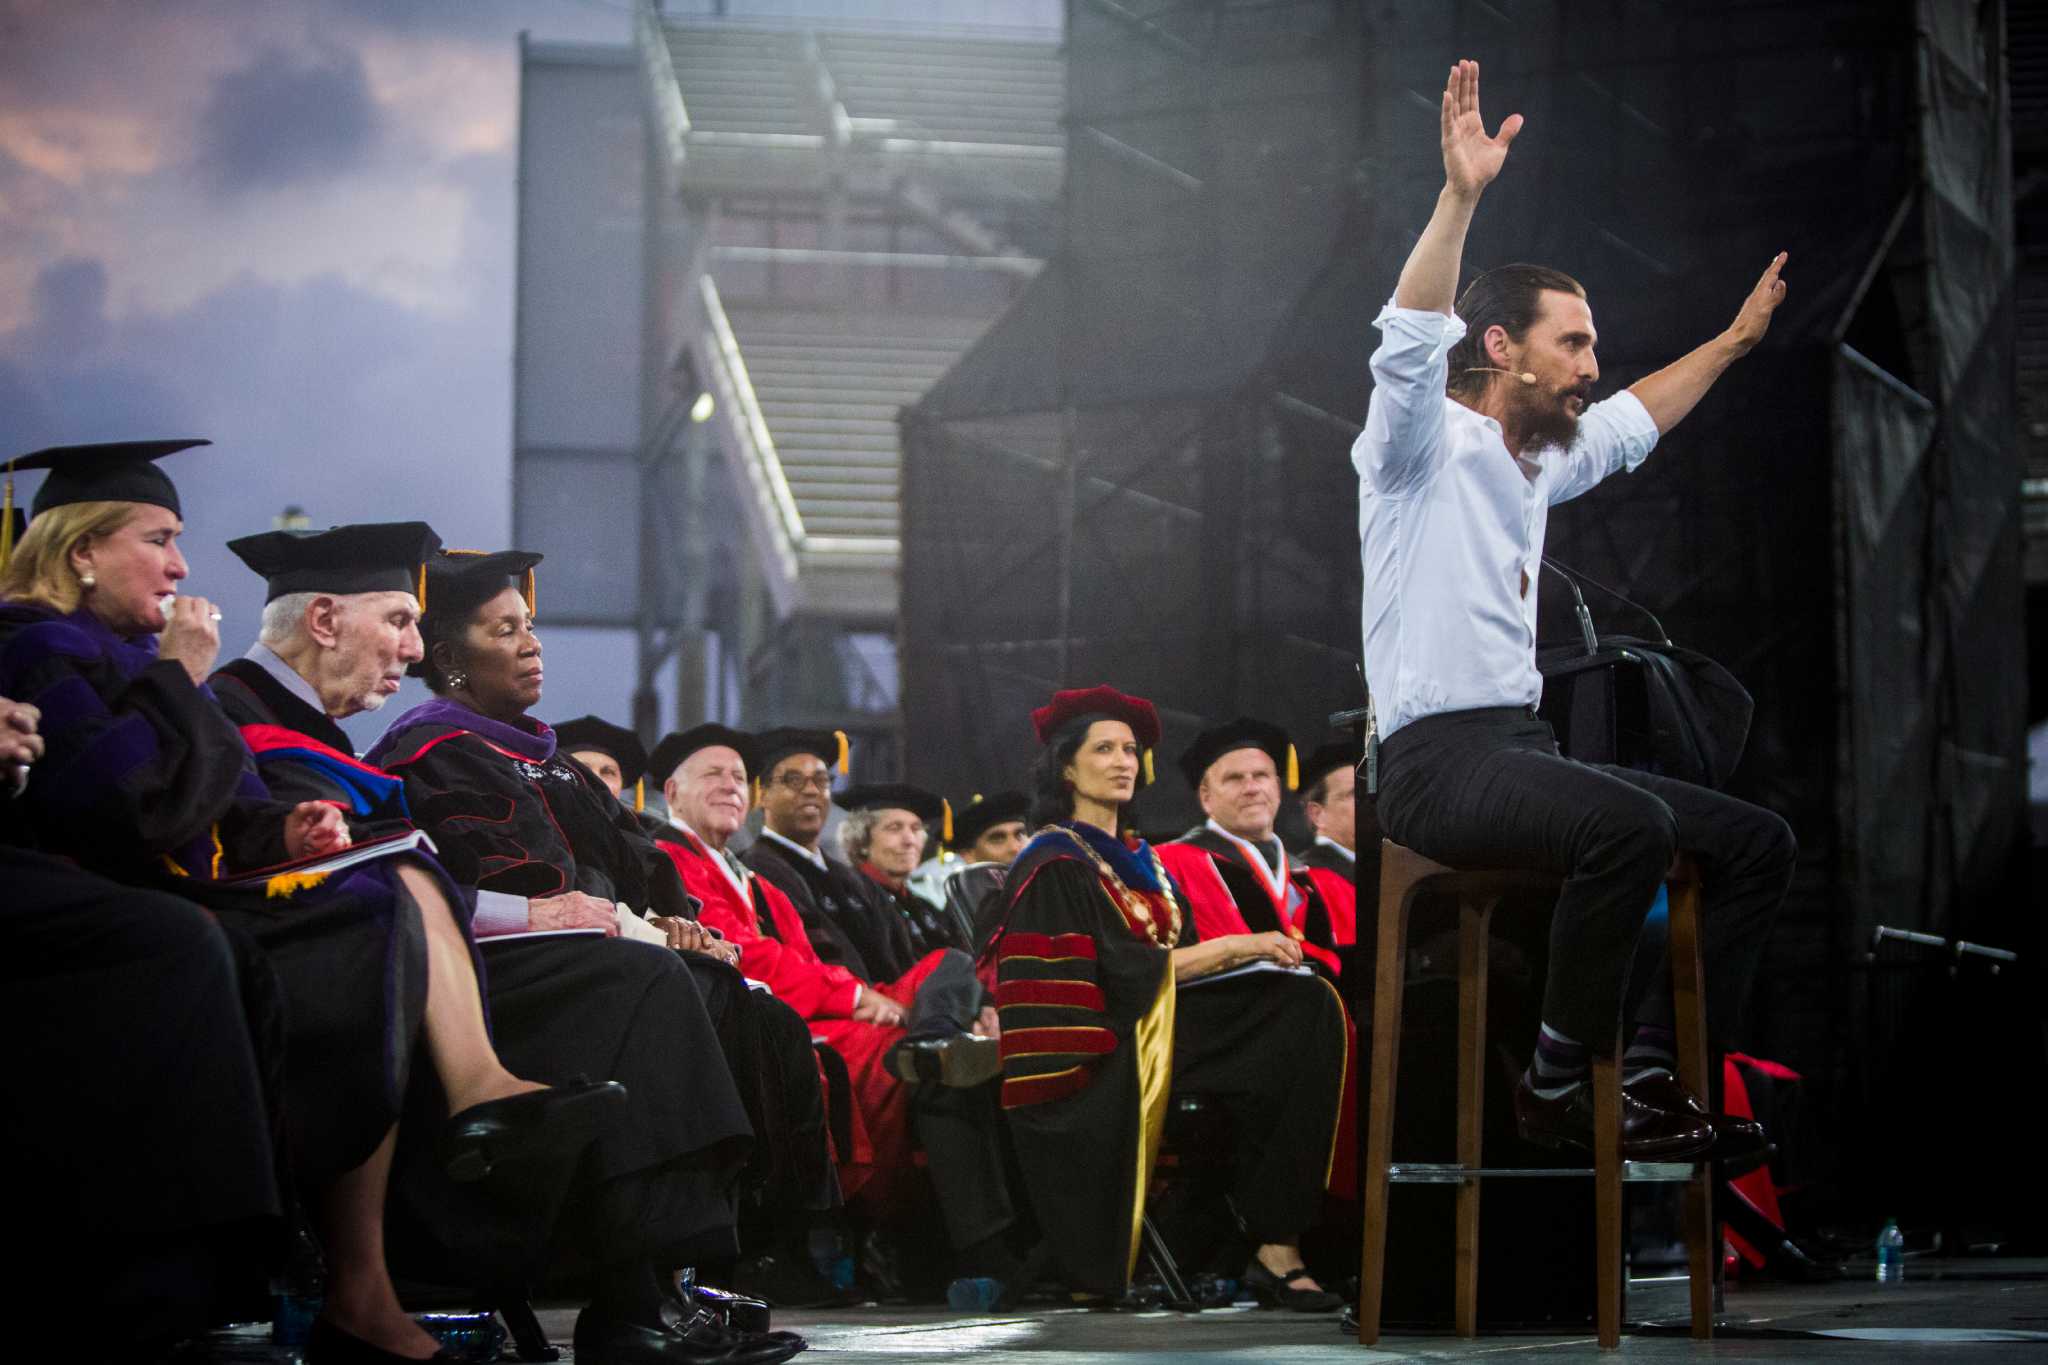 McConaughey draws in life lessons in lengthy UH commencement address - Houston Chronicle